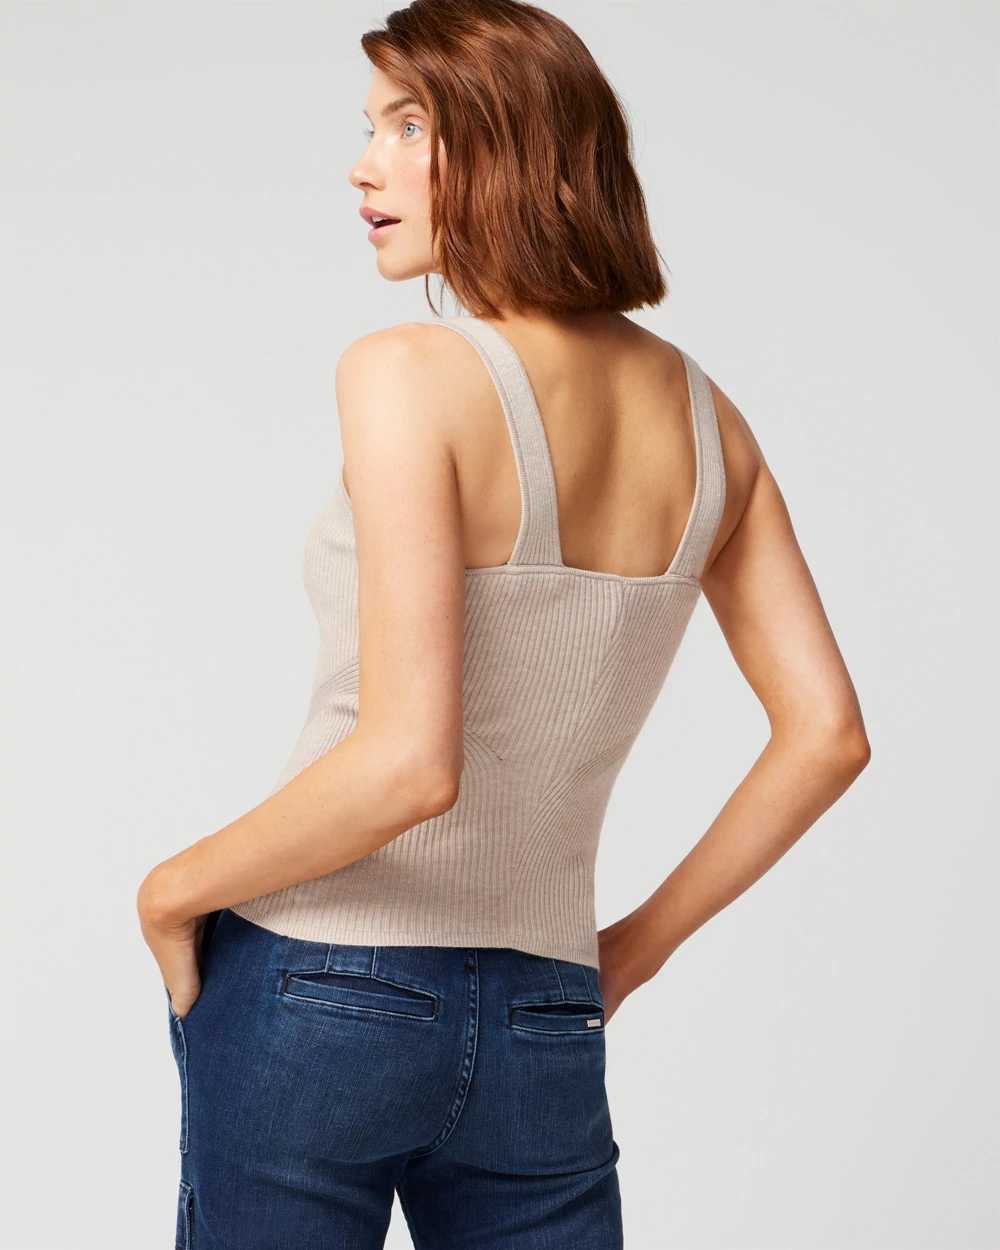 Cashmere Blend Rib Tank click to view larger image.